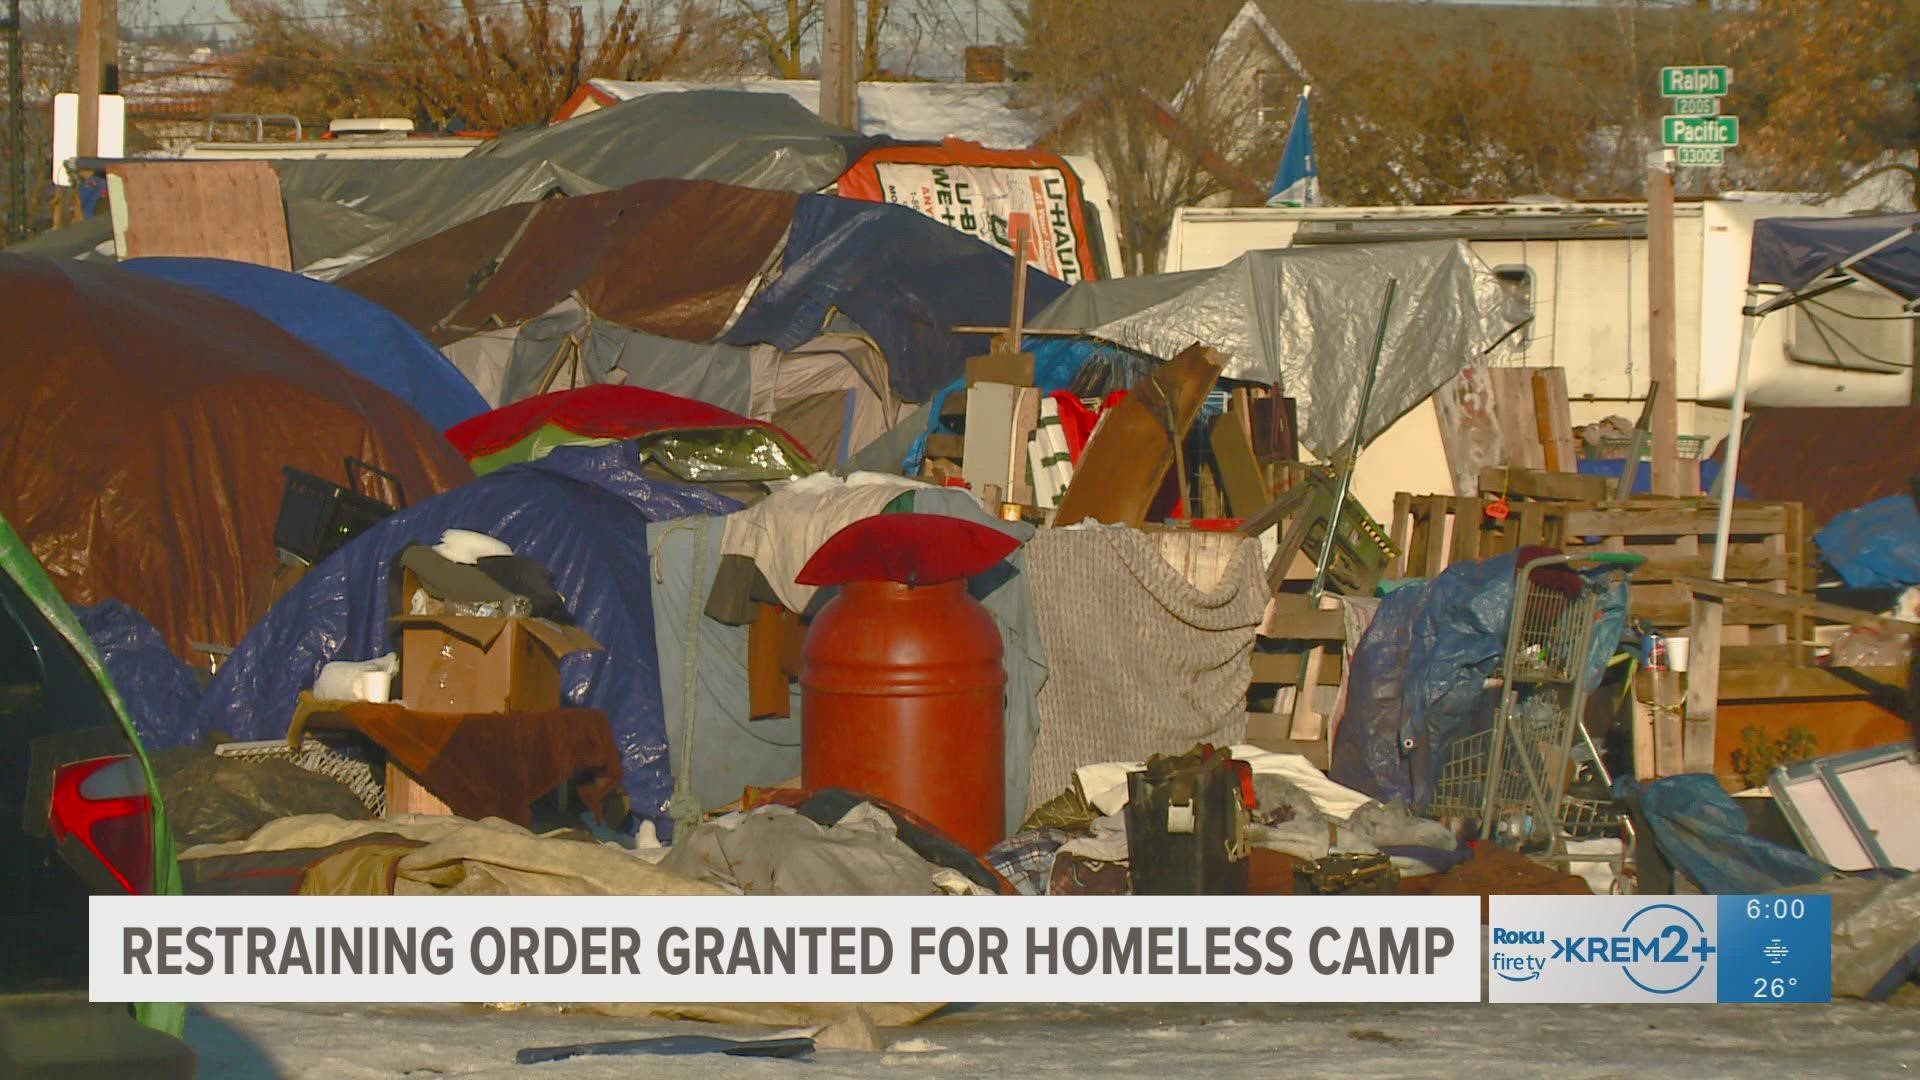 U.S. District Court Judge Stanley Bastian granted the restraining order requested by Jewels Helping Hands, residents of the camp and Disability Rights Washington.